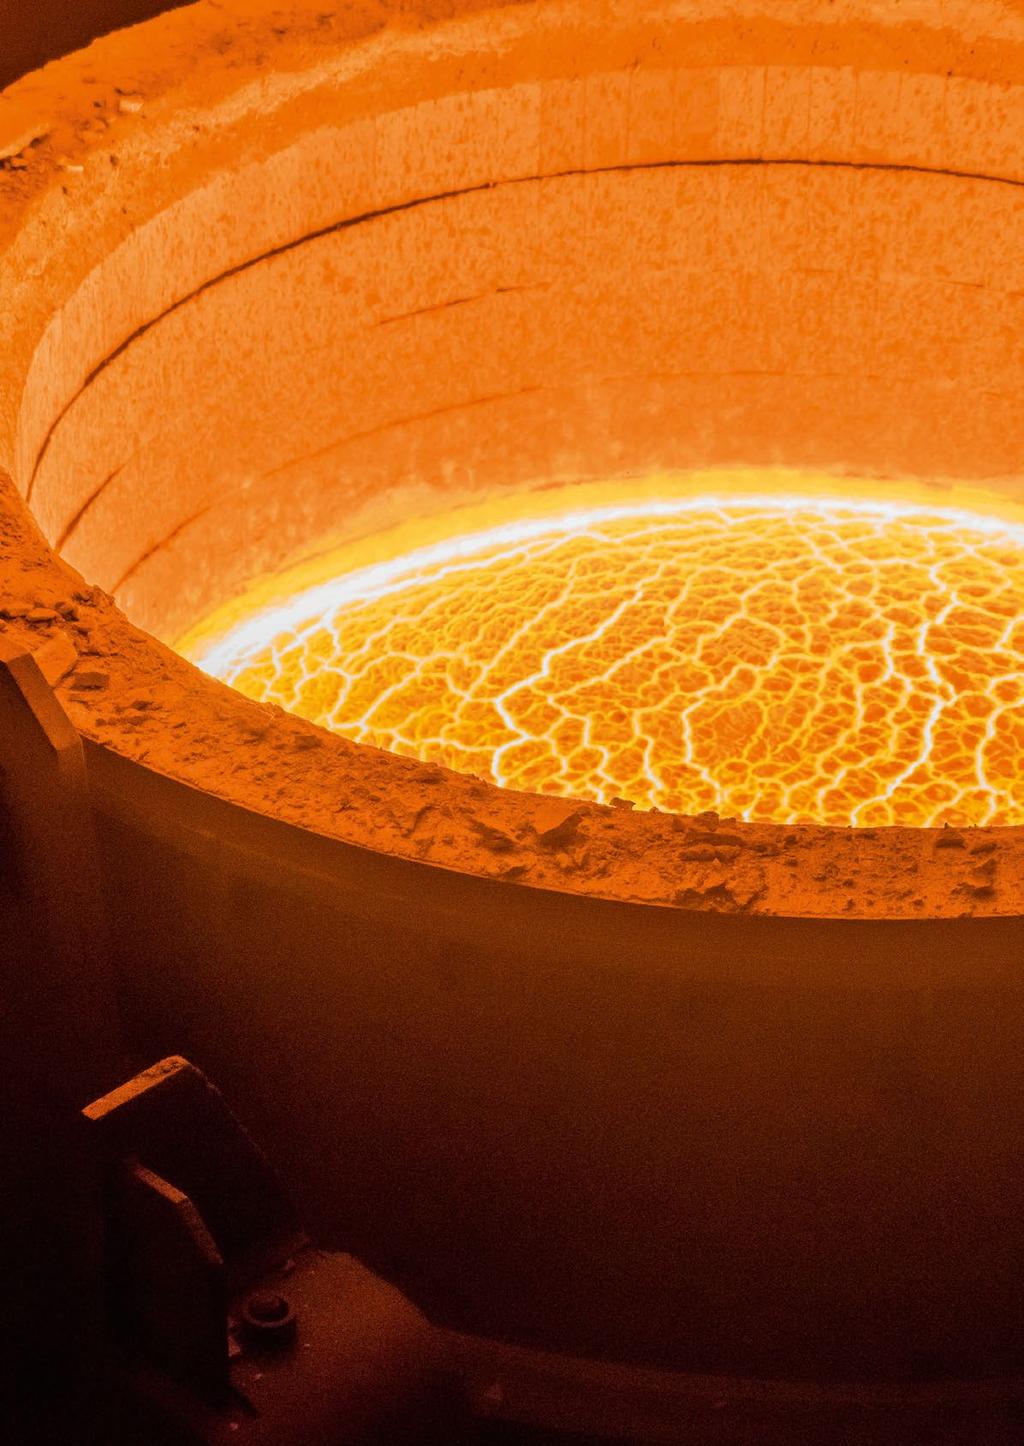 46 A SELECTION OF THE MOST REMARKABLE SOLUTIONS OF PRIMETALS TECHNOLOGIES FOR THE DIGITALIZATION OF STEELMAKING In steelmaking, advanced digitalized processes enable vastly